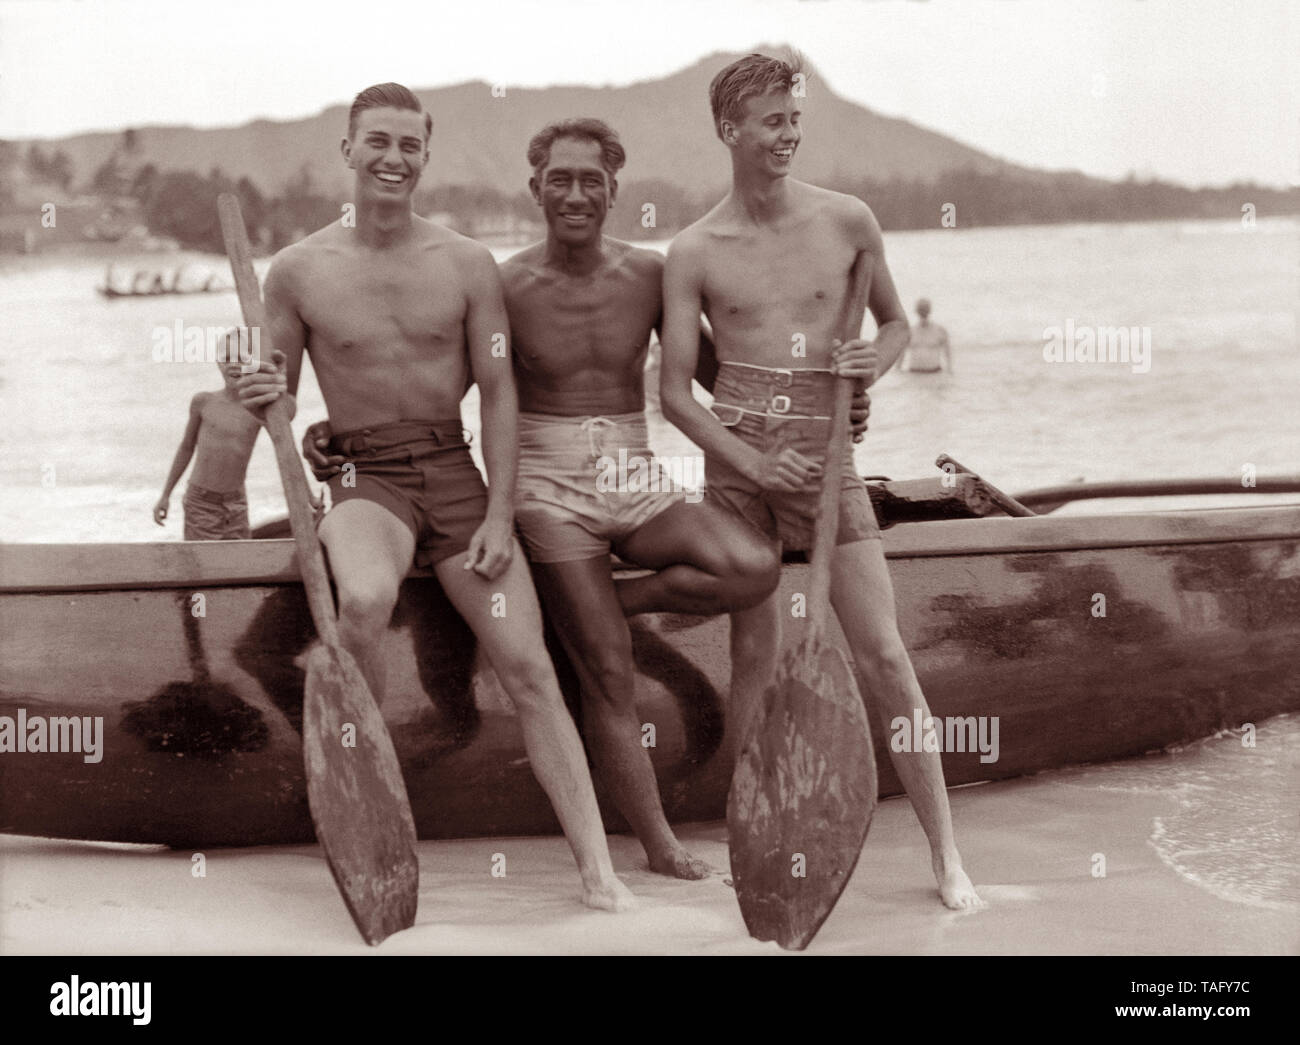 Hawaiian surfing legend, Duke Kahanamoku, with FDR's sons Franklin D. Roosevelt, Jr. and John Roosevelt at Waikiki Beach in Honolulu, Hawaii. President Roosevelt, along with his sons, traveled aboard the USS Houston to Hawaii in 1934, which was the first visit of a sitting US president to the Territory. Duke Kahanamoku gave private surfing lessons to the Roosevelt sons and their party during their stay at Waikiki. Stock Photo